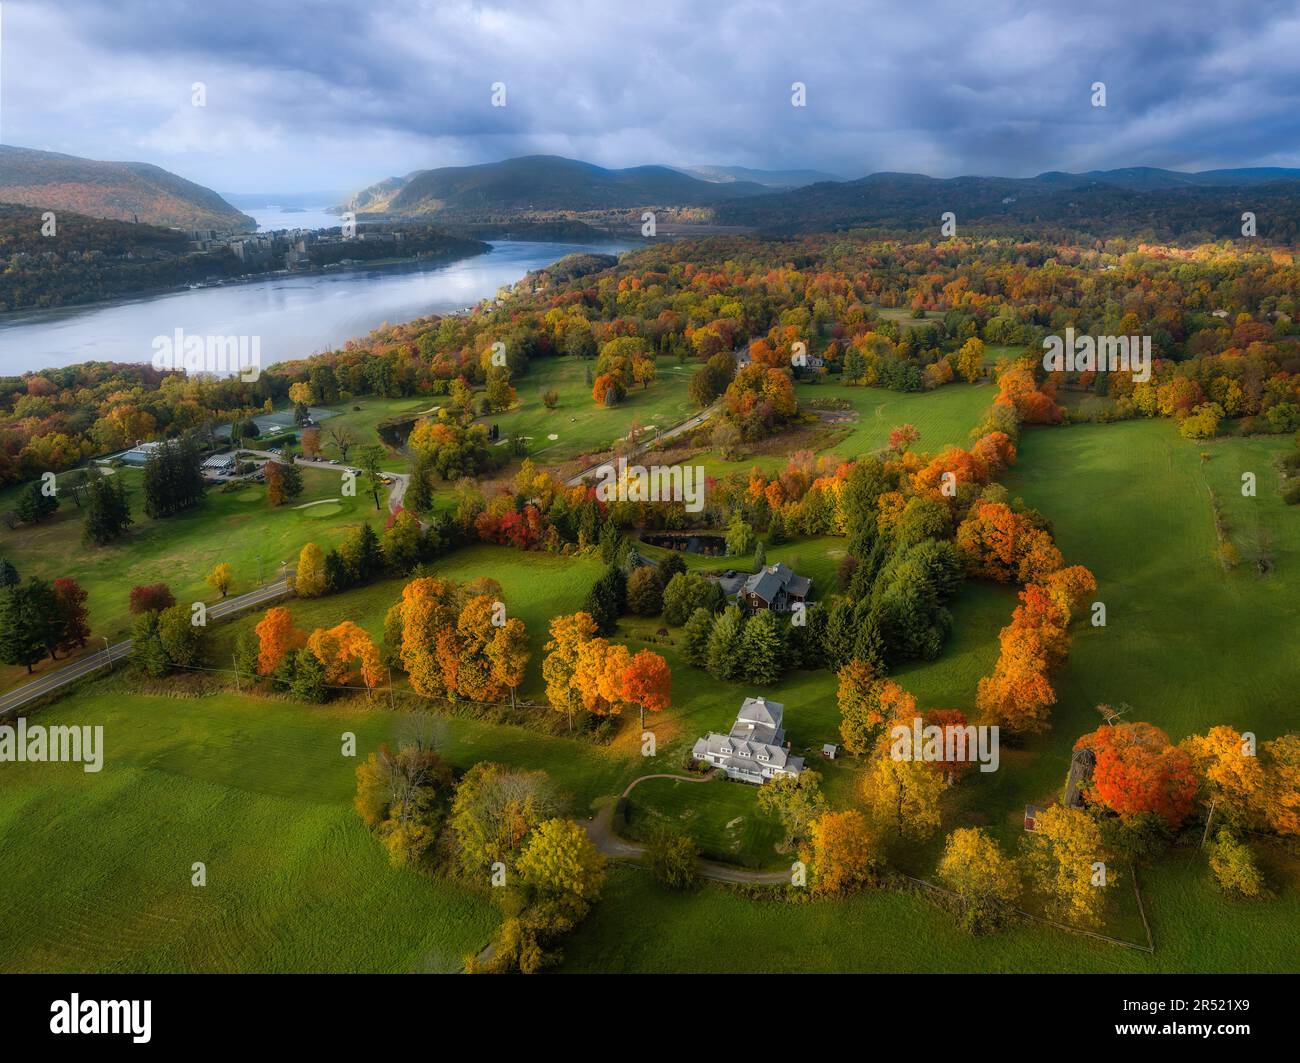 Hudson Valley NY Aerial - Aerial view during the fall foliage colorful season of the mid Hudson Valley area of New York.   This image is also availabl Stock Photo